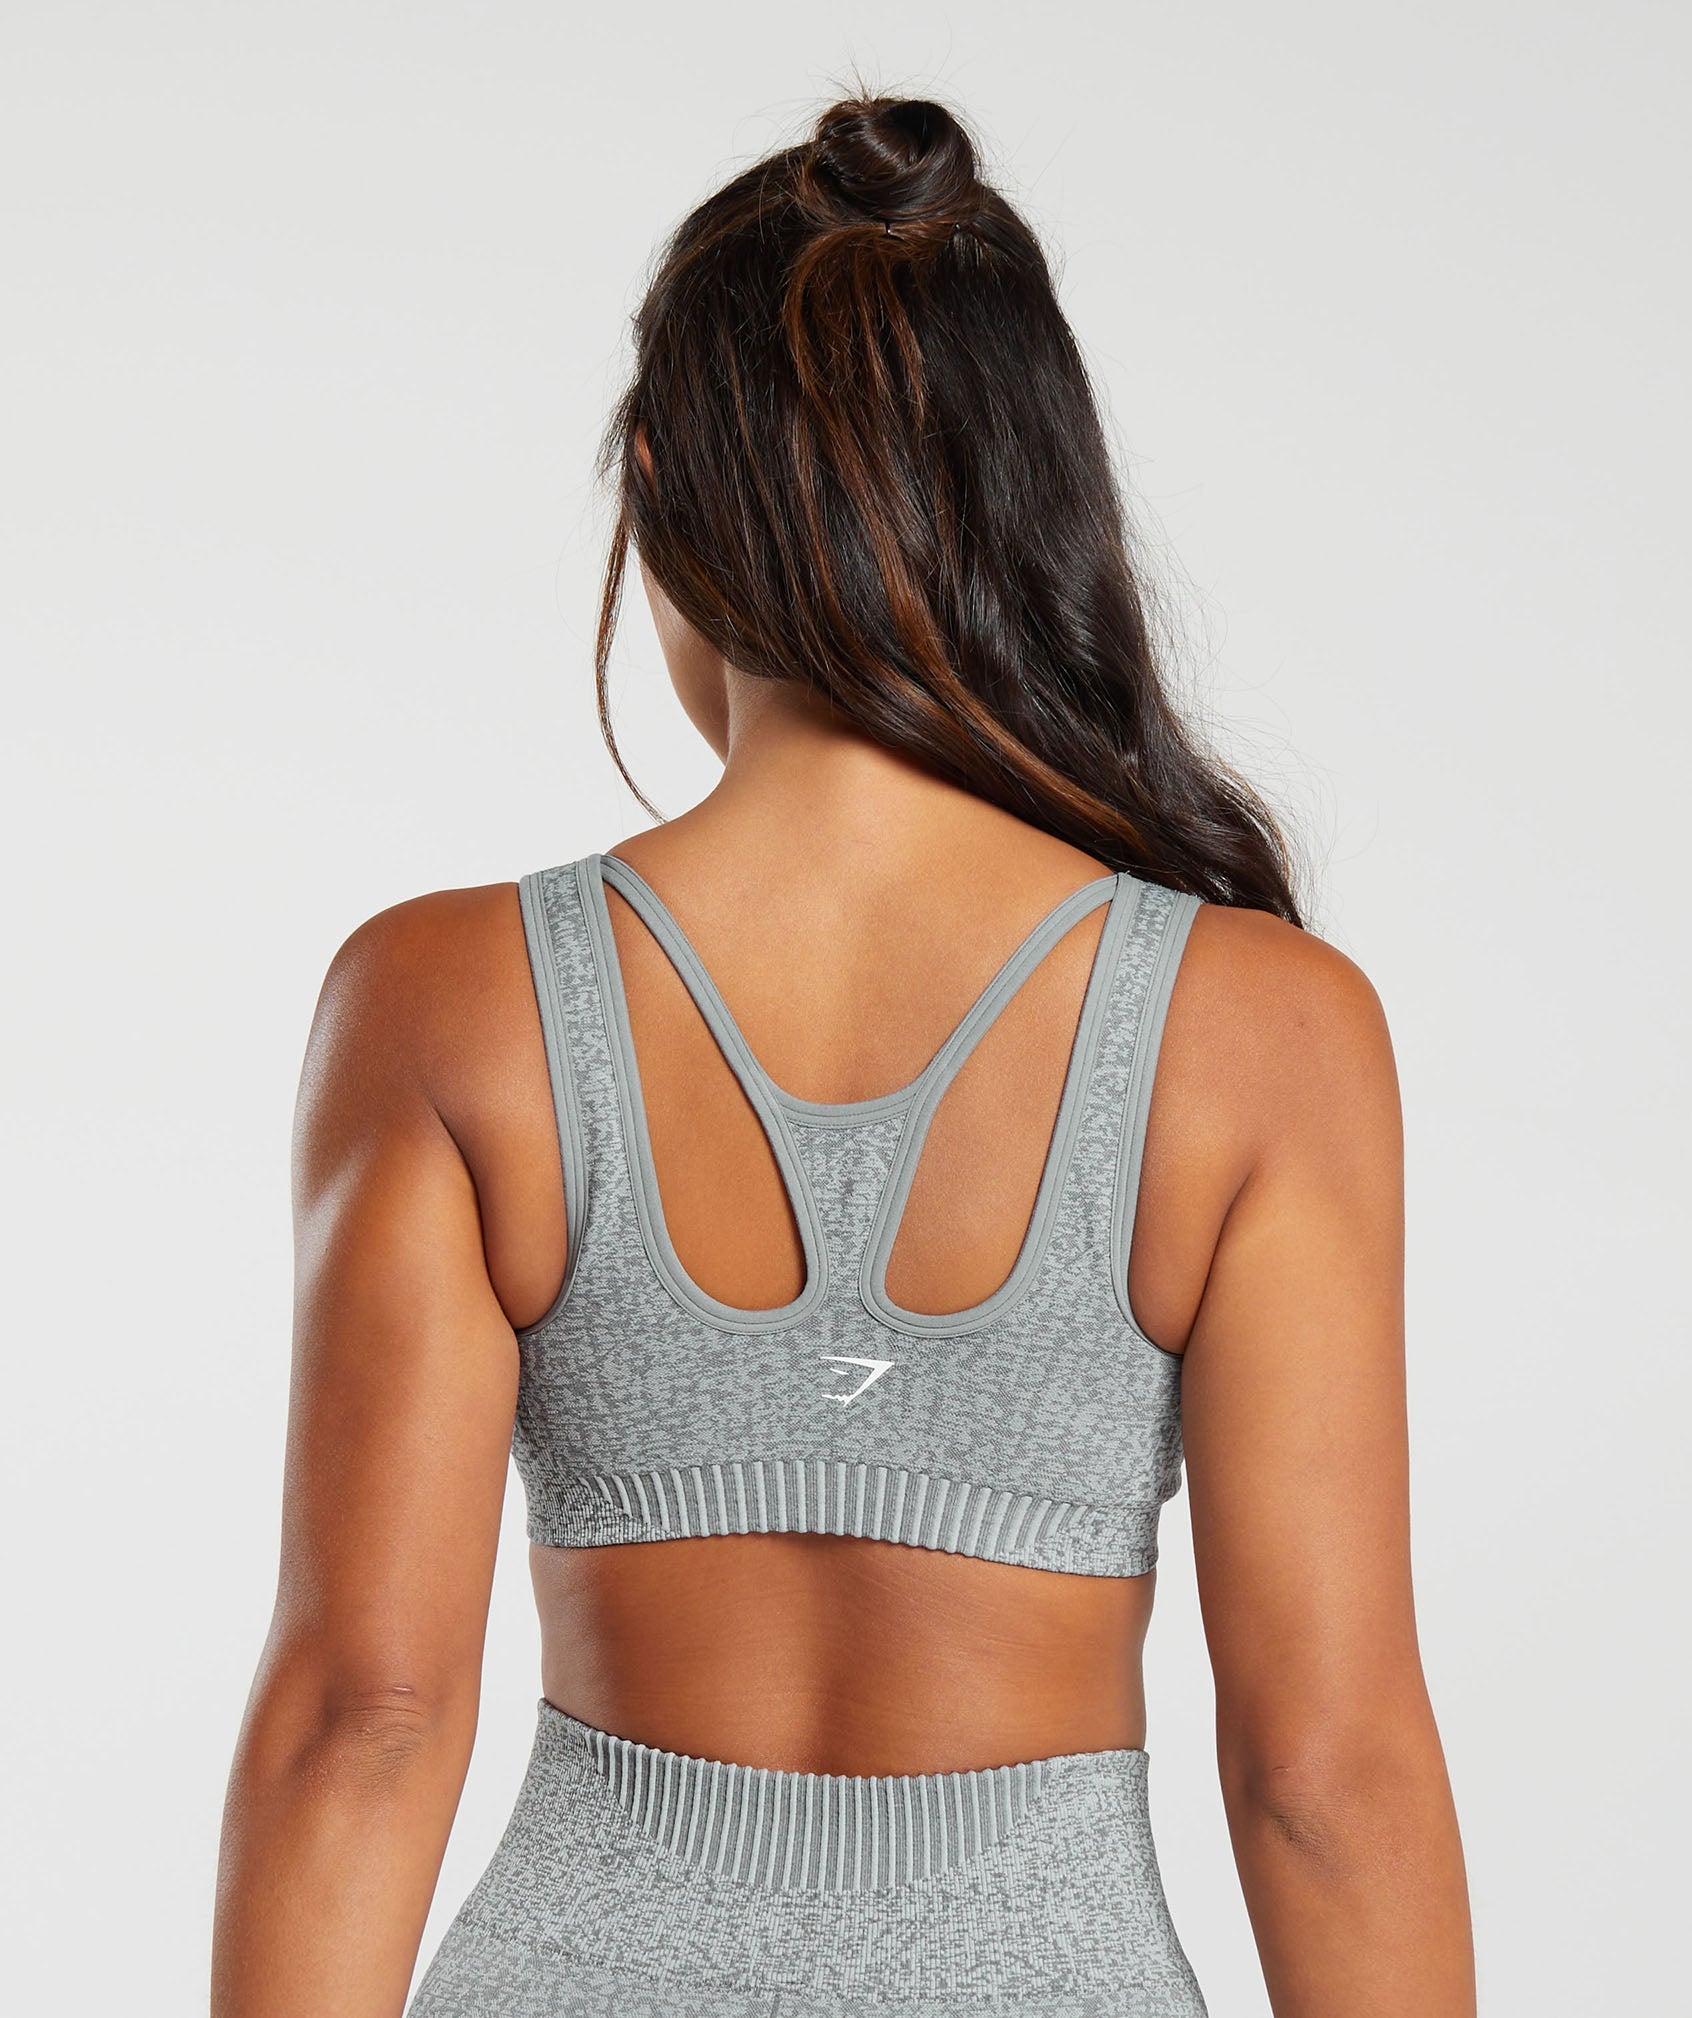 Yogalicious 2 Pack Seamless V-Neck Sports Bra - Cloud Pink/Htr.Grey - Small